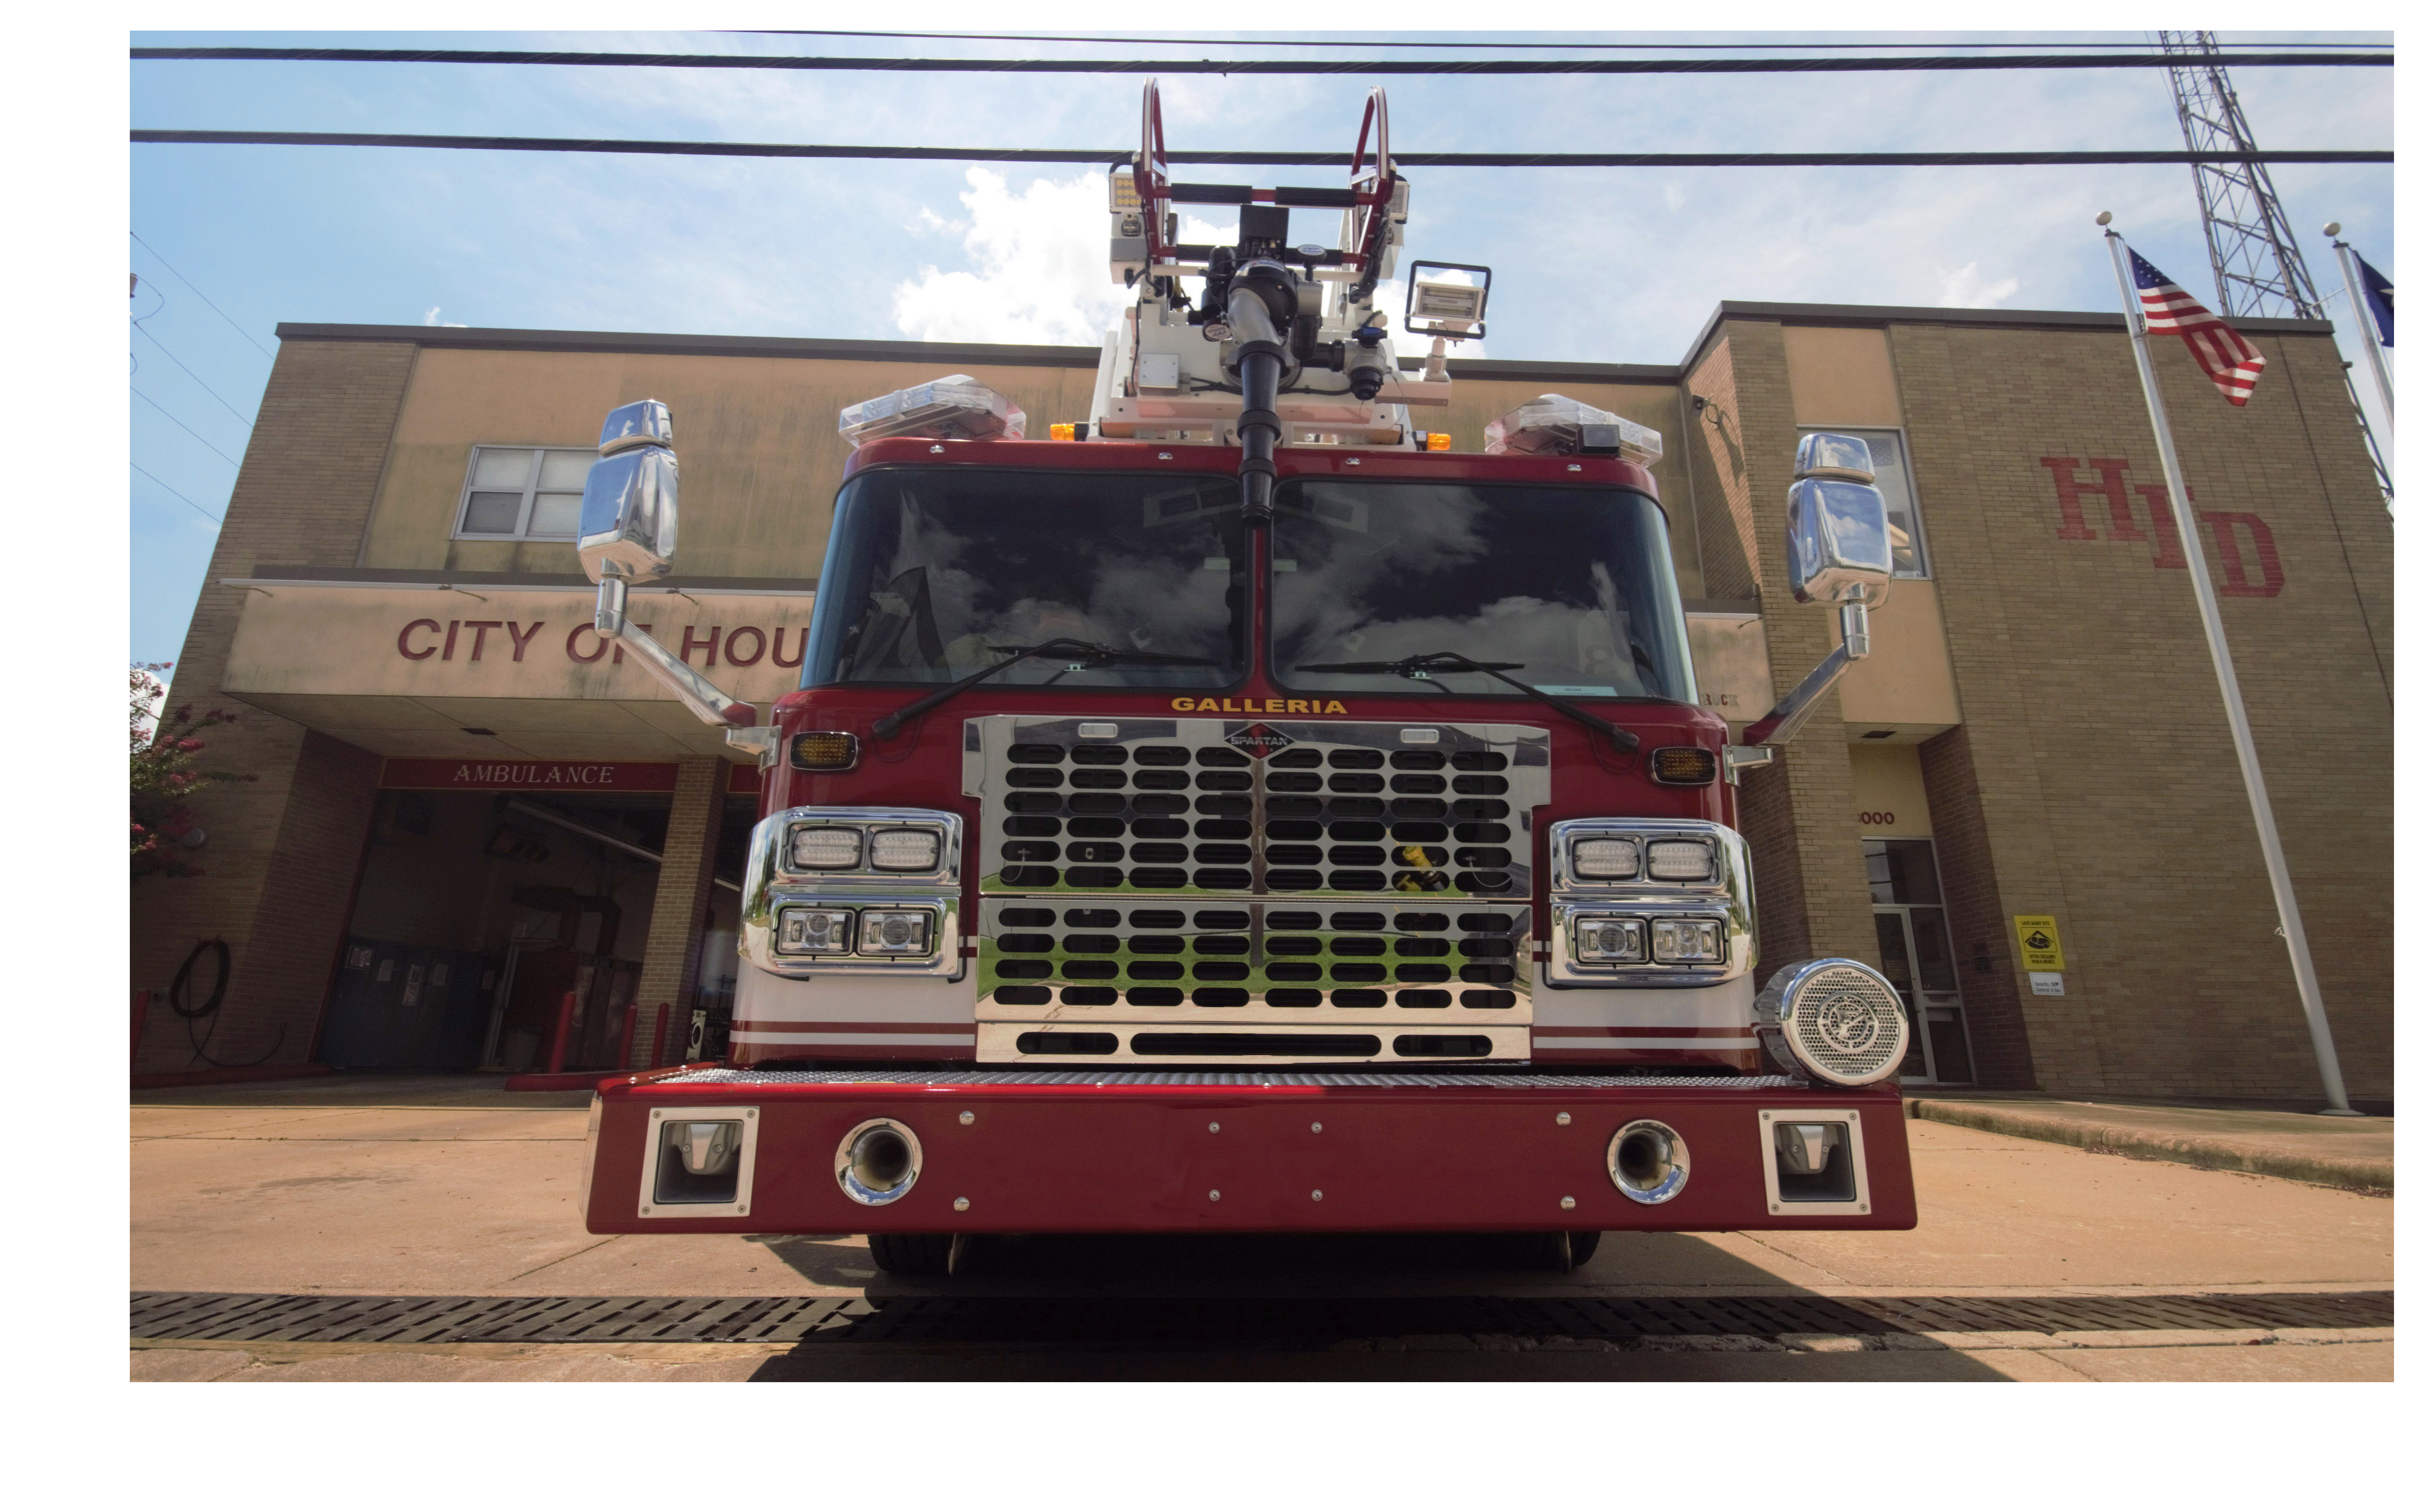 HFD Ladder 28 front view in front of fire station